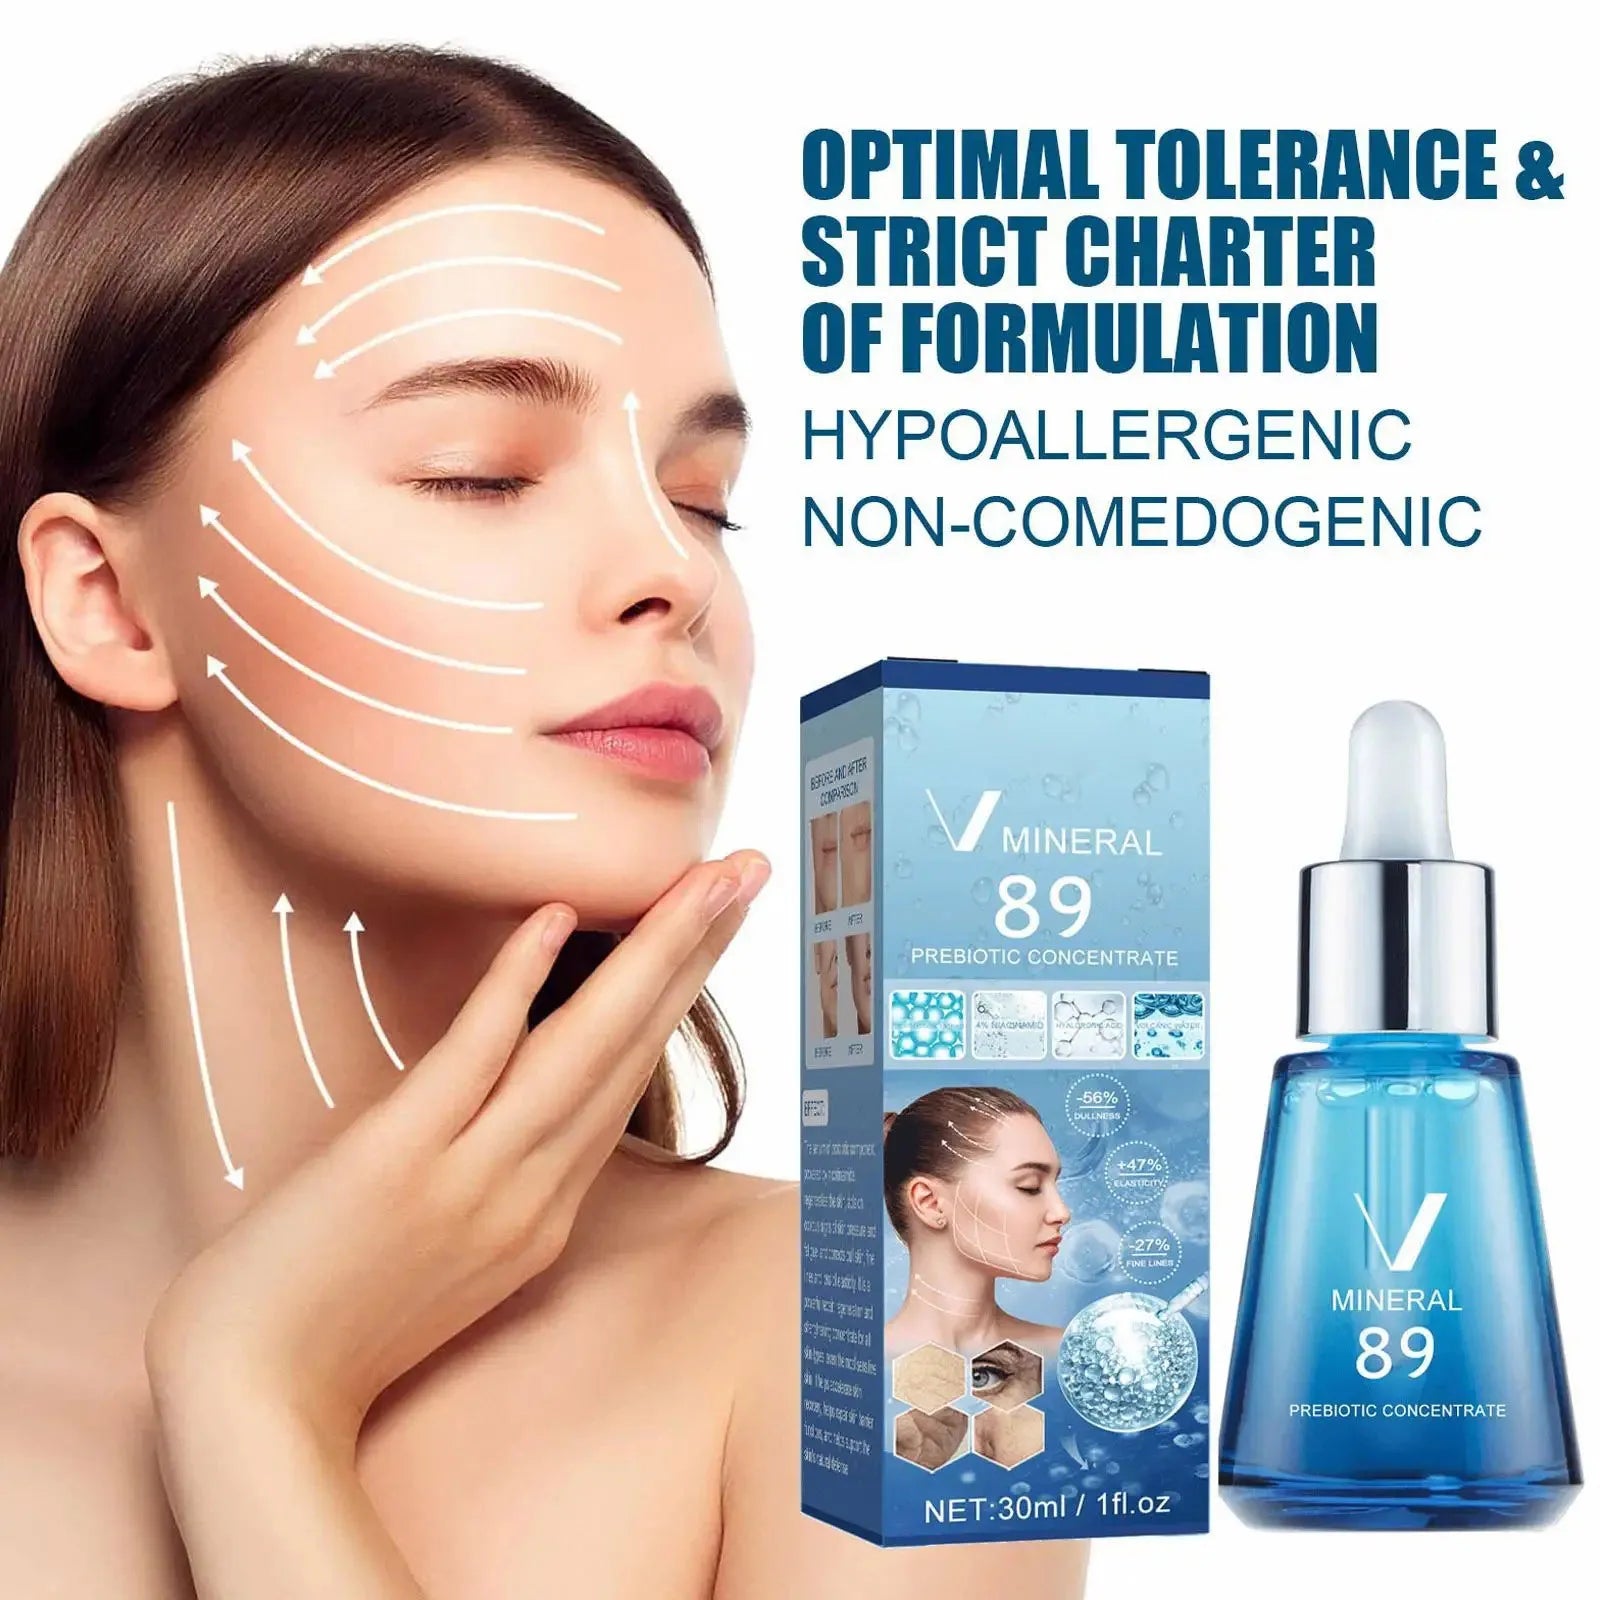 V89 Probiotic Concentrate Anti-Wrinkle Serum Hyaluronic Acid Anti Aging Brightening Cream Facial Lifting Firming Daily Skin Care